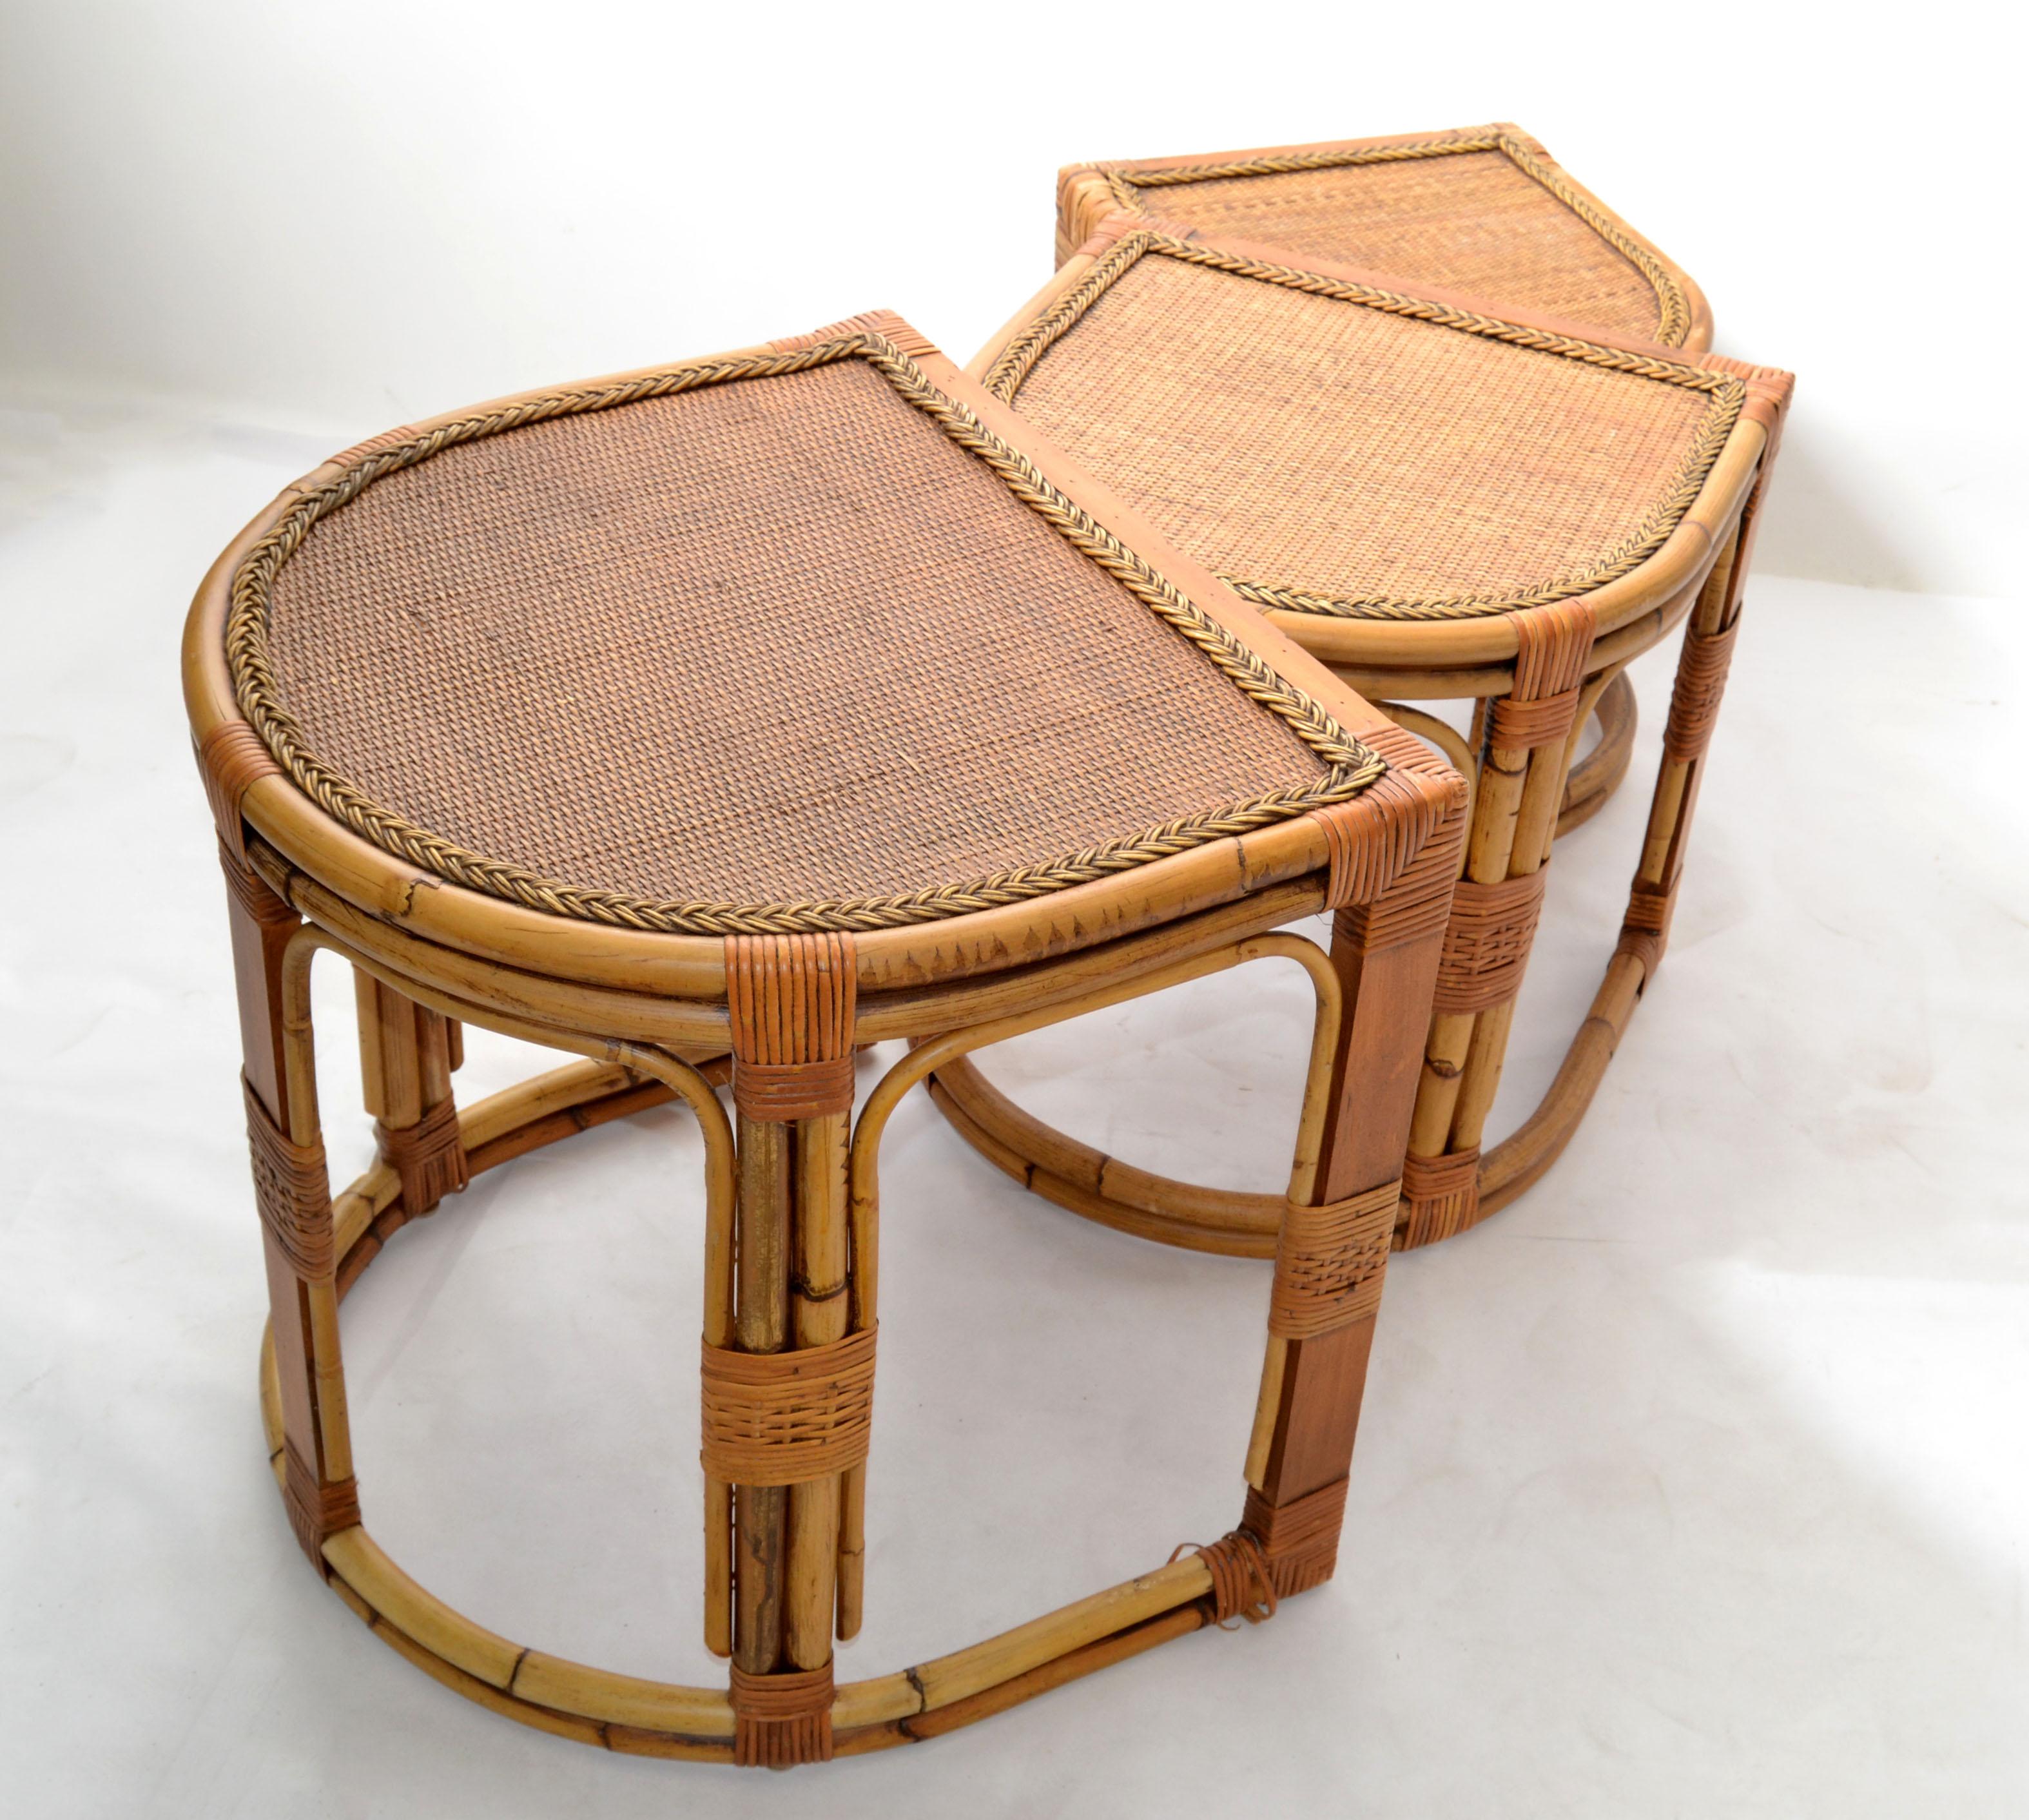 Mid-Century Modern Bohemian style semi-circle bent bamboo & handwoven cane top set of 3 nesting tables or stacking tables.
Each occasional table has a hand braided cane Top Border. 
Size of each table:
20 D x 22 L x 22 inches H.
19.25 D x 19.25